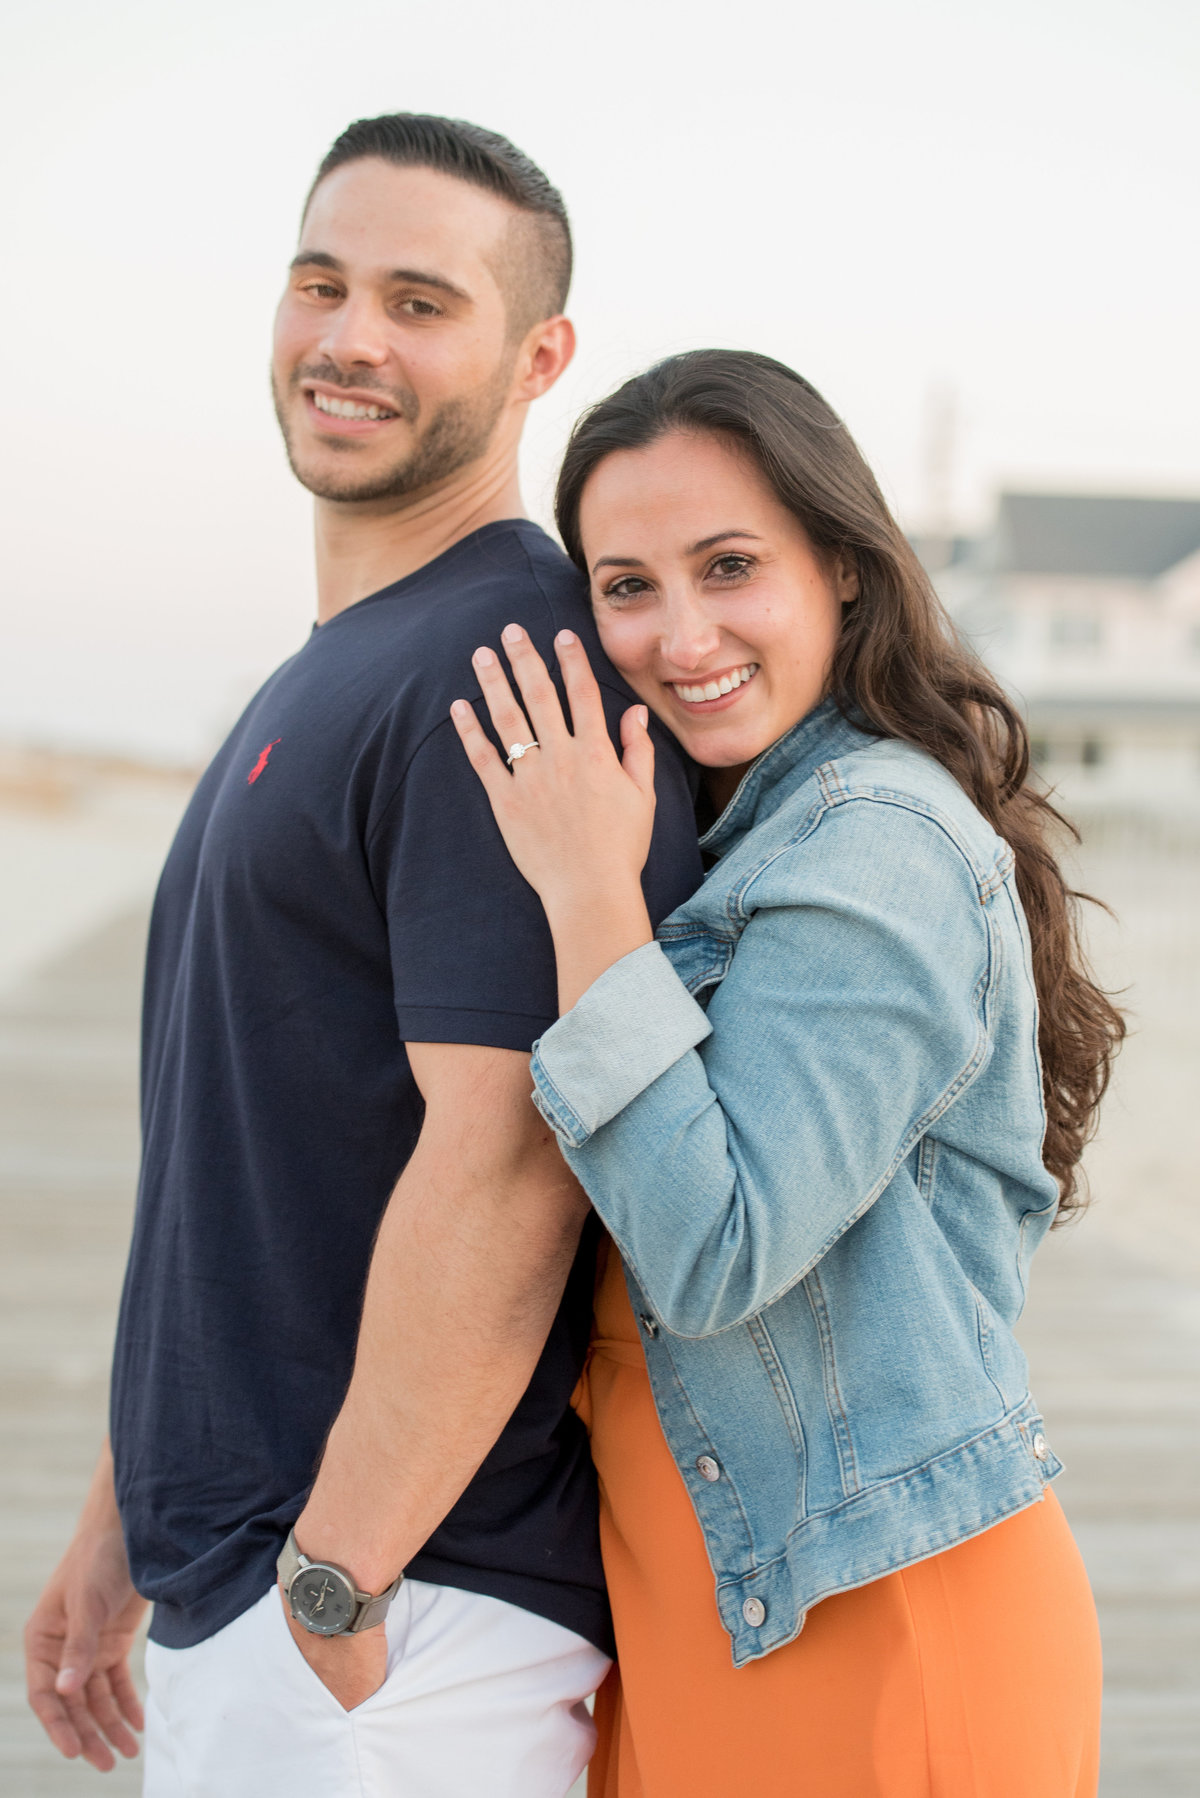 lisa-albino-lavallette-beach-surprise-proposal-imagery-by-marianne-2019-98